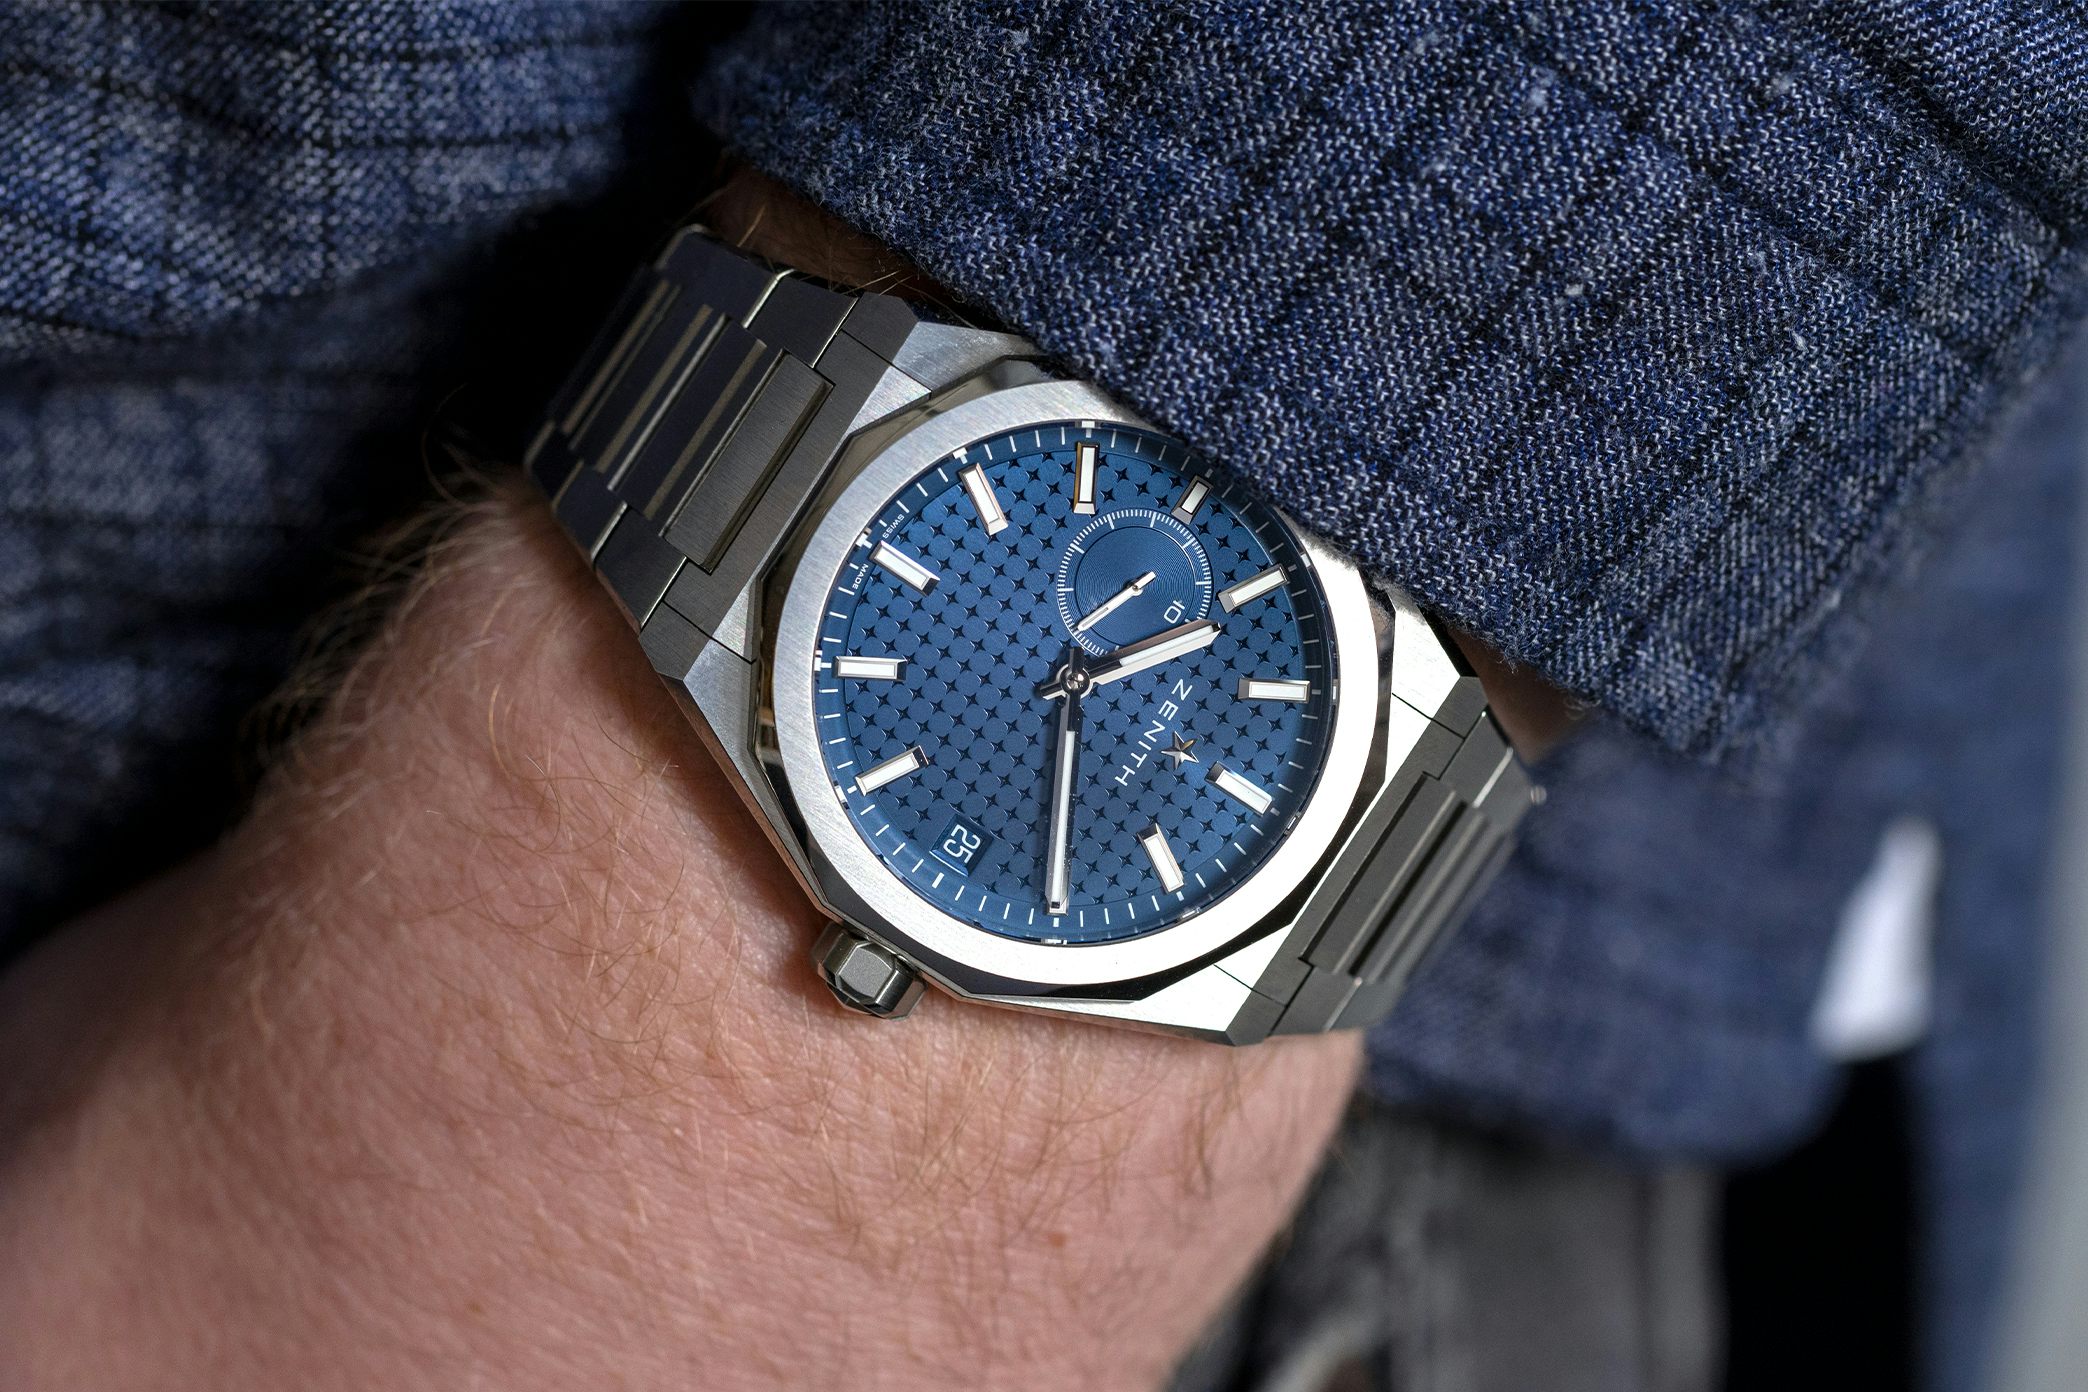 Watch with Analog Display: Timeless Style for the Modern Era